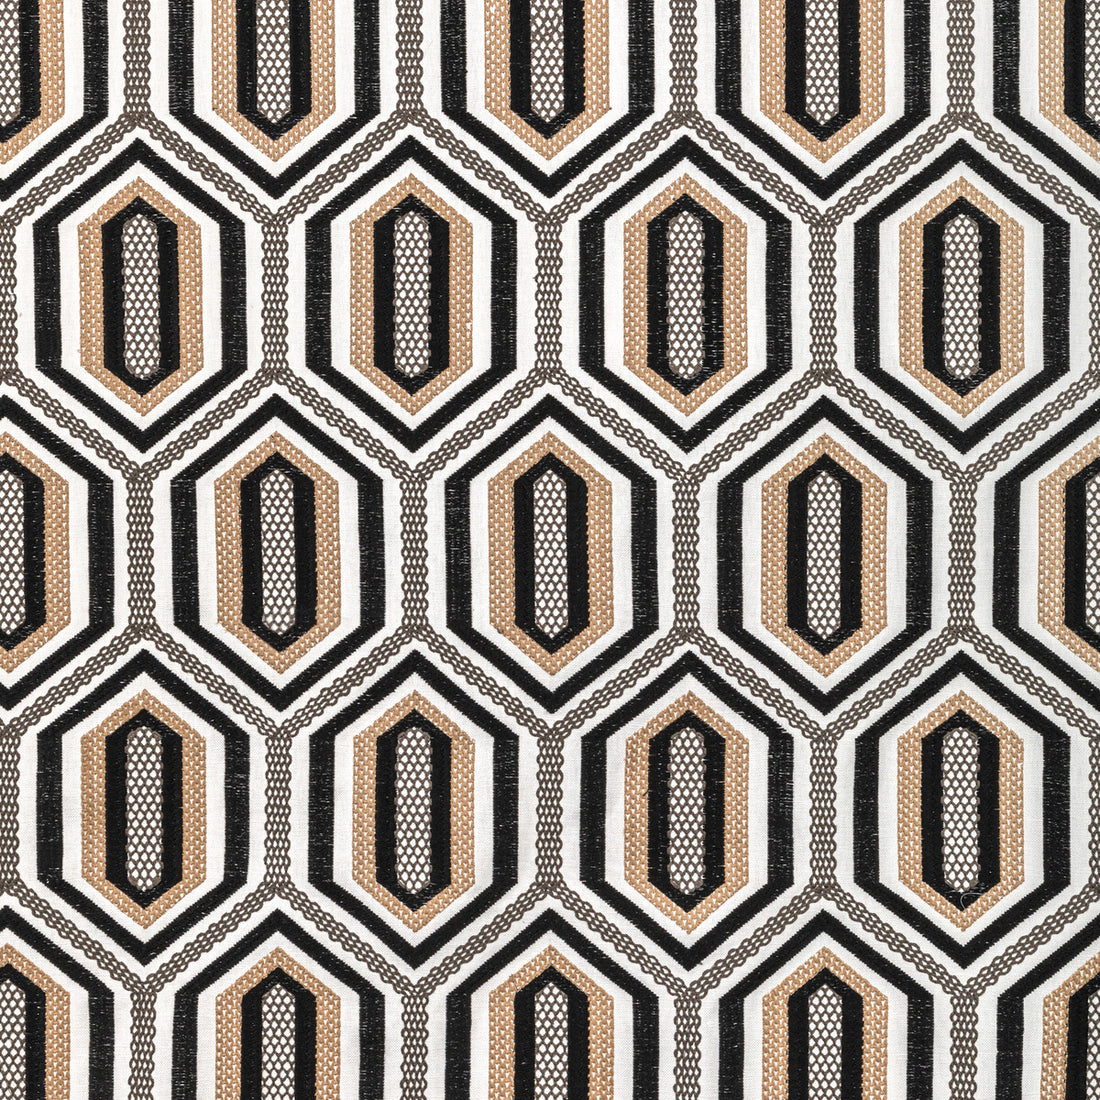 Kaleidoscope Emb fabric in onyx color - pattern 36368.816.0 - by Kravet Couture in the Corey Damen Jenkins Trad Nouveau collection